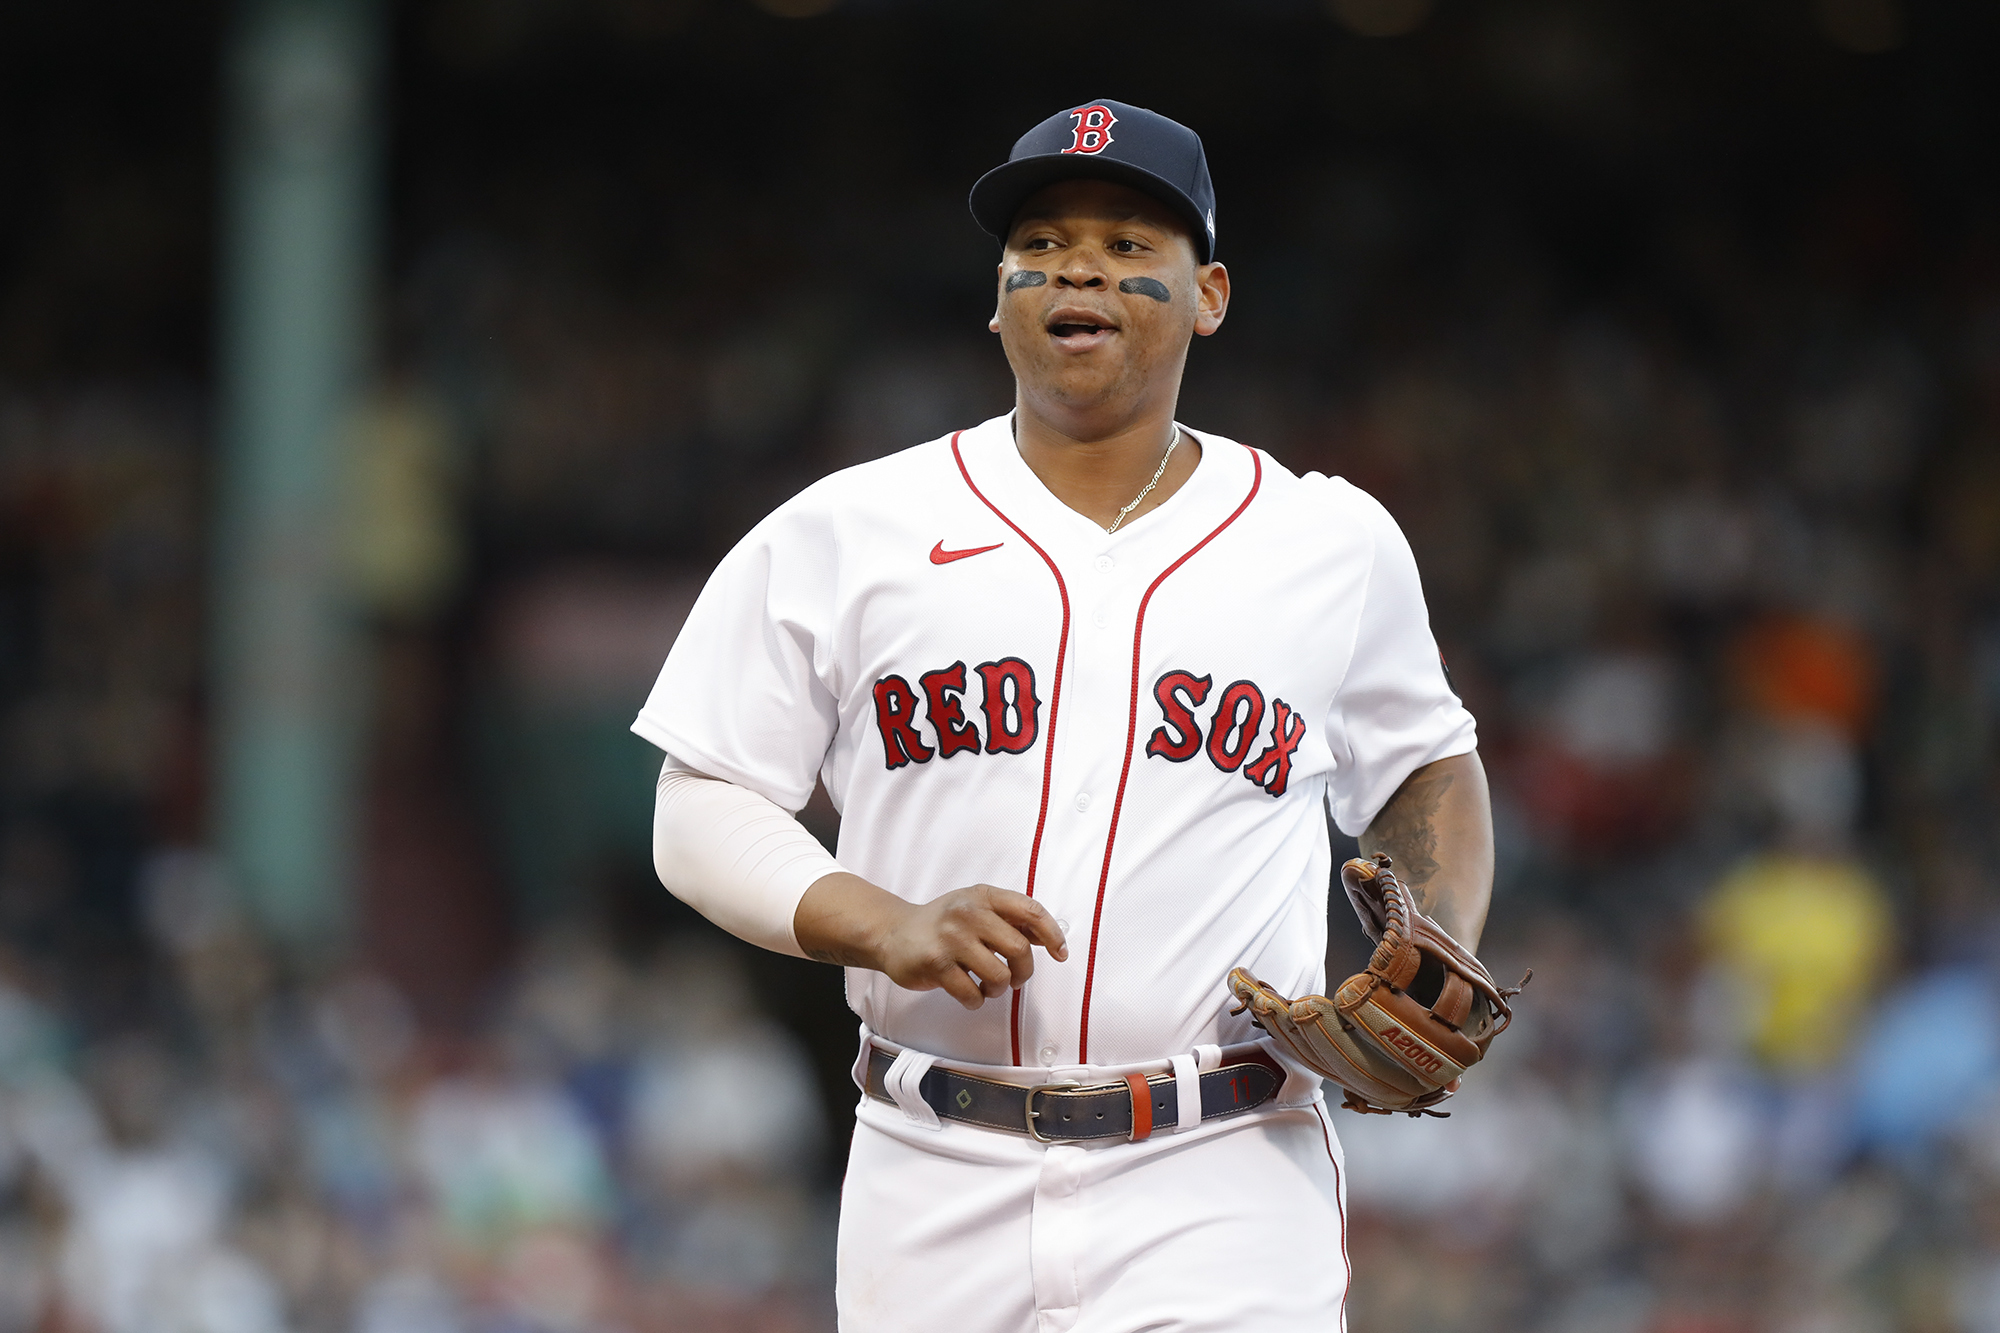 Buckley: Rafael Devers is a star. So we'd like to get to know him better -  The Athletic